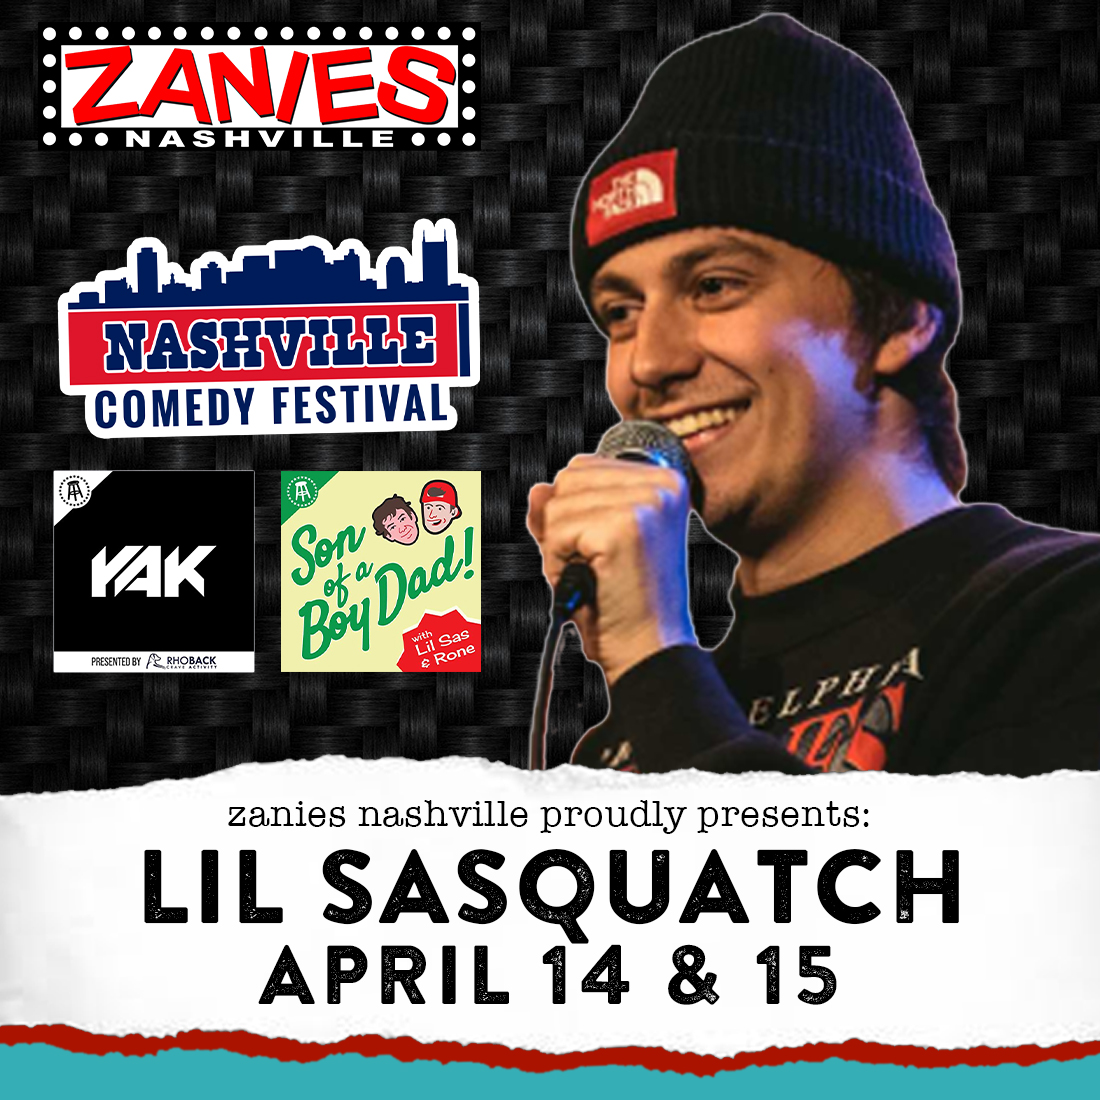 👣 THIS WEEKEND AT ZANIES
Comedian and podcaster @lilsasquatch66 is heading to Zanies this weekend, April 14 & 15, as part of the @NashComedyFest! VERY limited tickets are still available and will sell out, Nashville--> bit.ly/NCF_Sasquatch